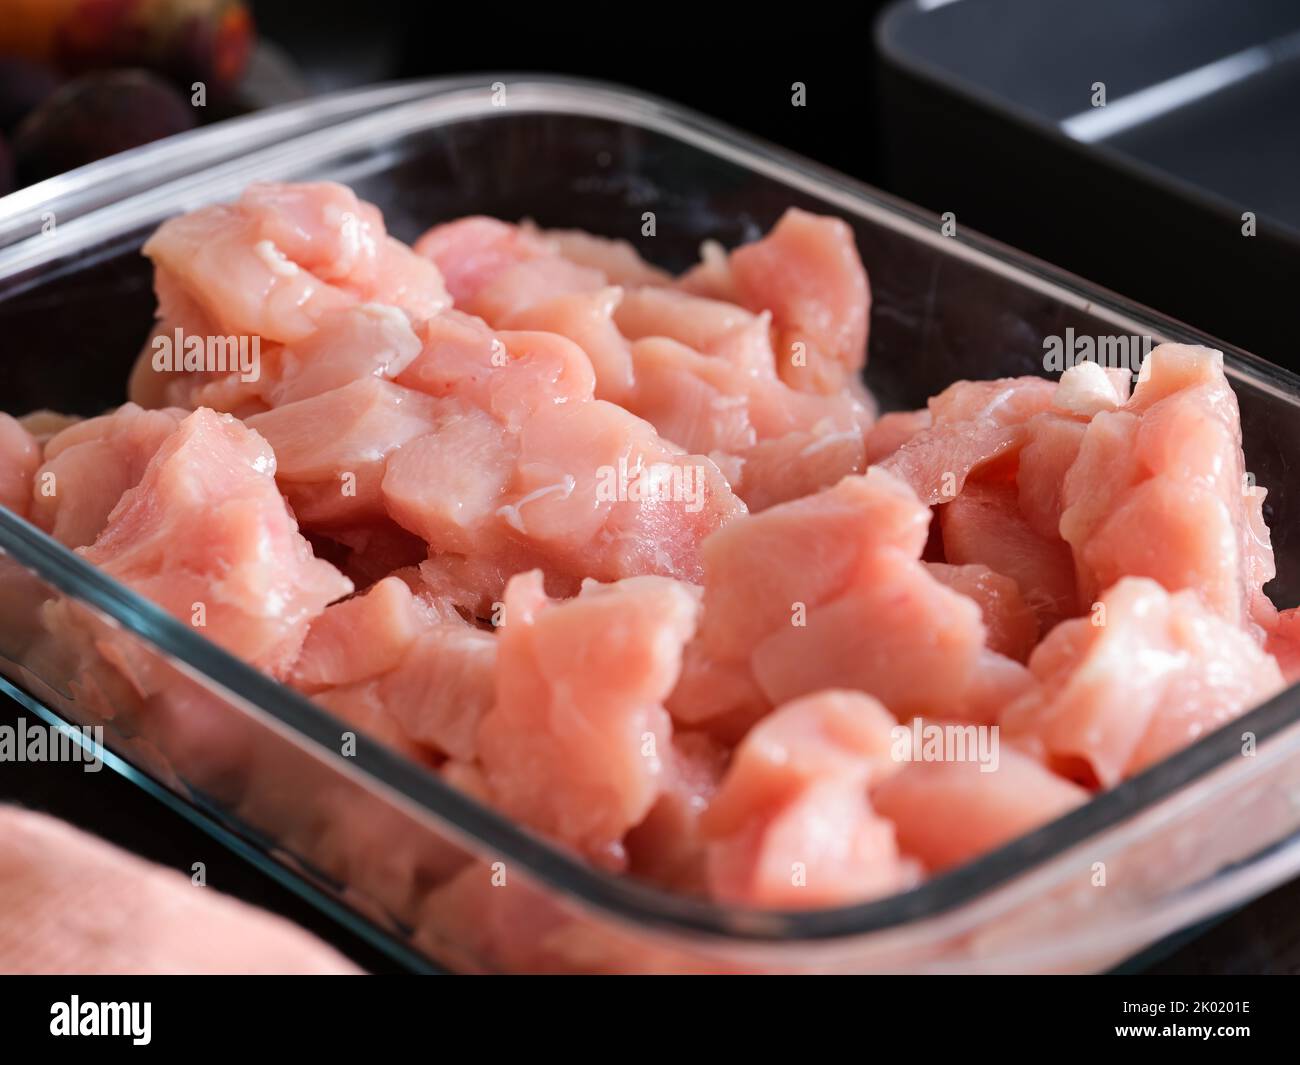 Pieces of raw chicken fillet in a glass baking tray. Close-up Stock Photo